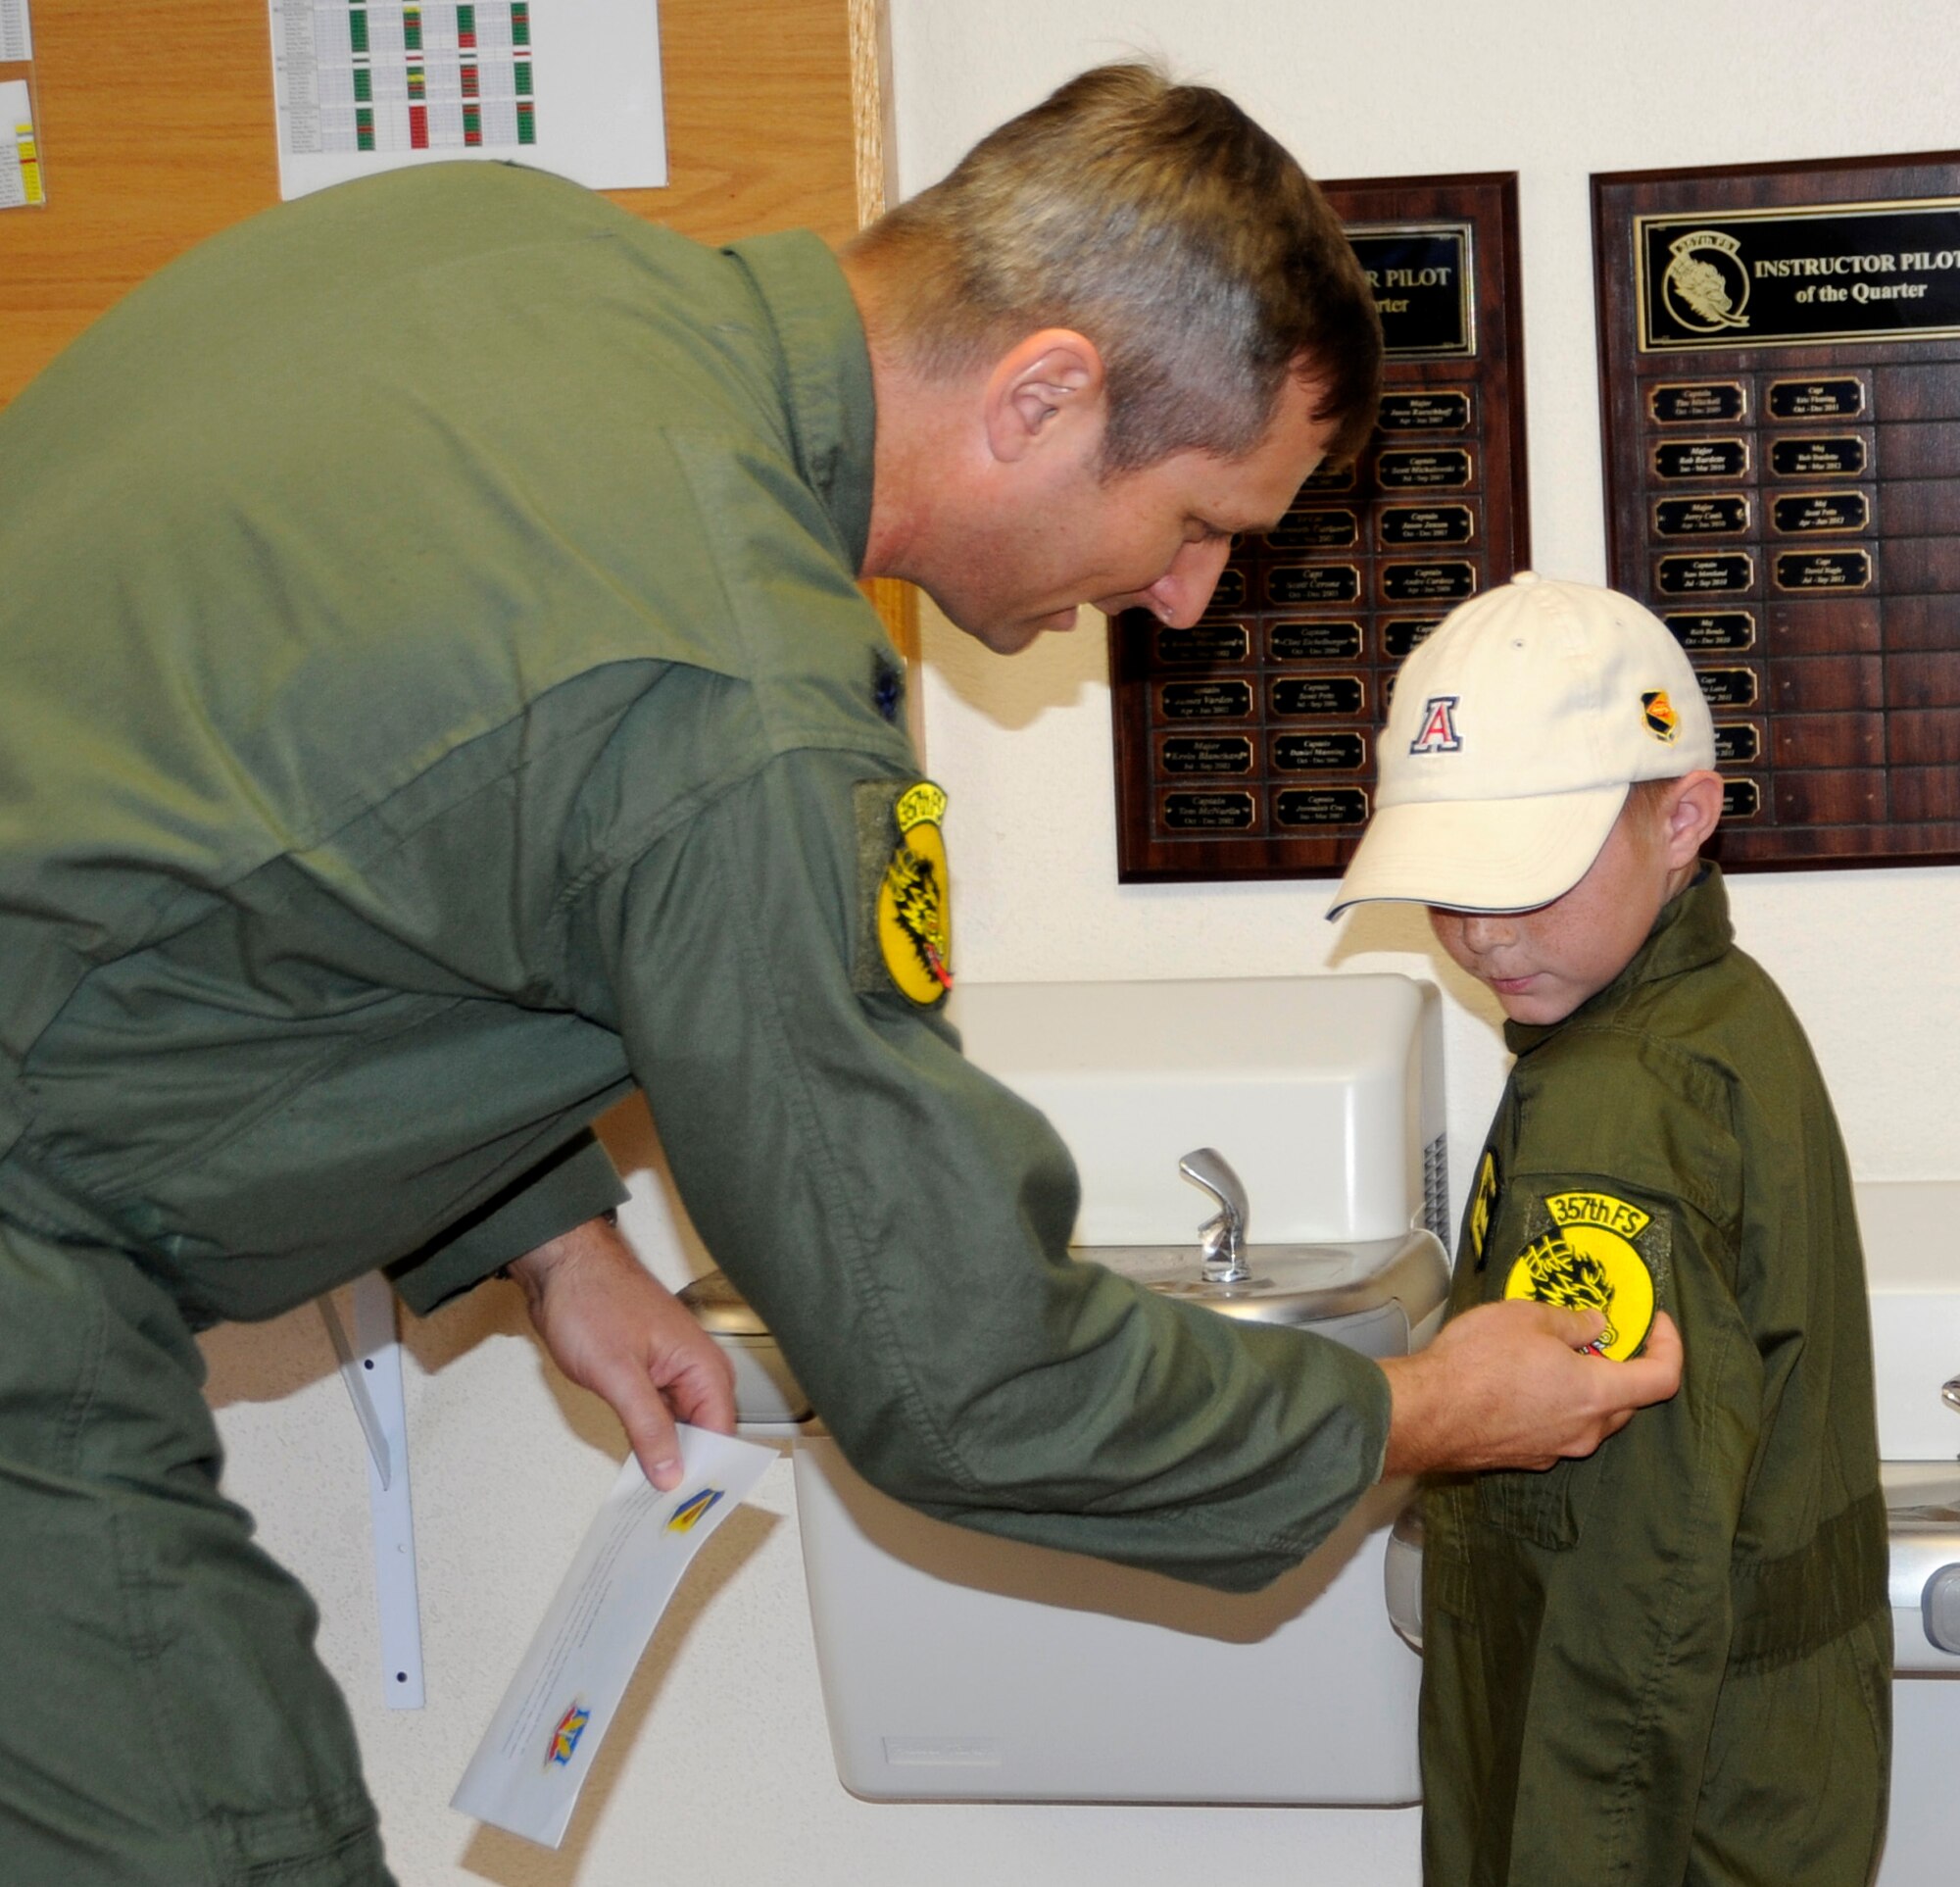 U.S. Air Force Lt Col. John Gabriel, 357th Fighter Squadron commander, gives Larry Ronstadt the 357th Fighter Squadron patch just after administering the Pilot for a Day "Oath of Office," during the Pilot for a Day program at Davis-Monthan Air Force Base, Ariz.  Larry was an honorary 357th FS pilot here on Oct 25, 2012, where he, his father and grandfather toured the squadron, visited an A-10 static, an HH-60 static and the base Fire Department.  Larry is the eight-year-old son of Jeff and Tiana Ronstadt. (U.S. Air Force photo by 1LT Susan Harrington/released)